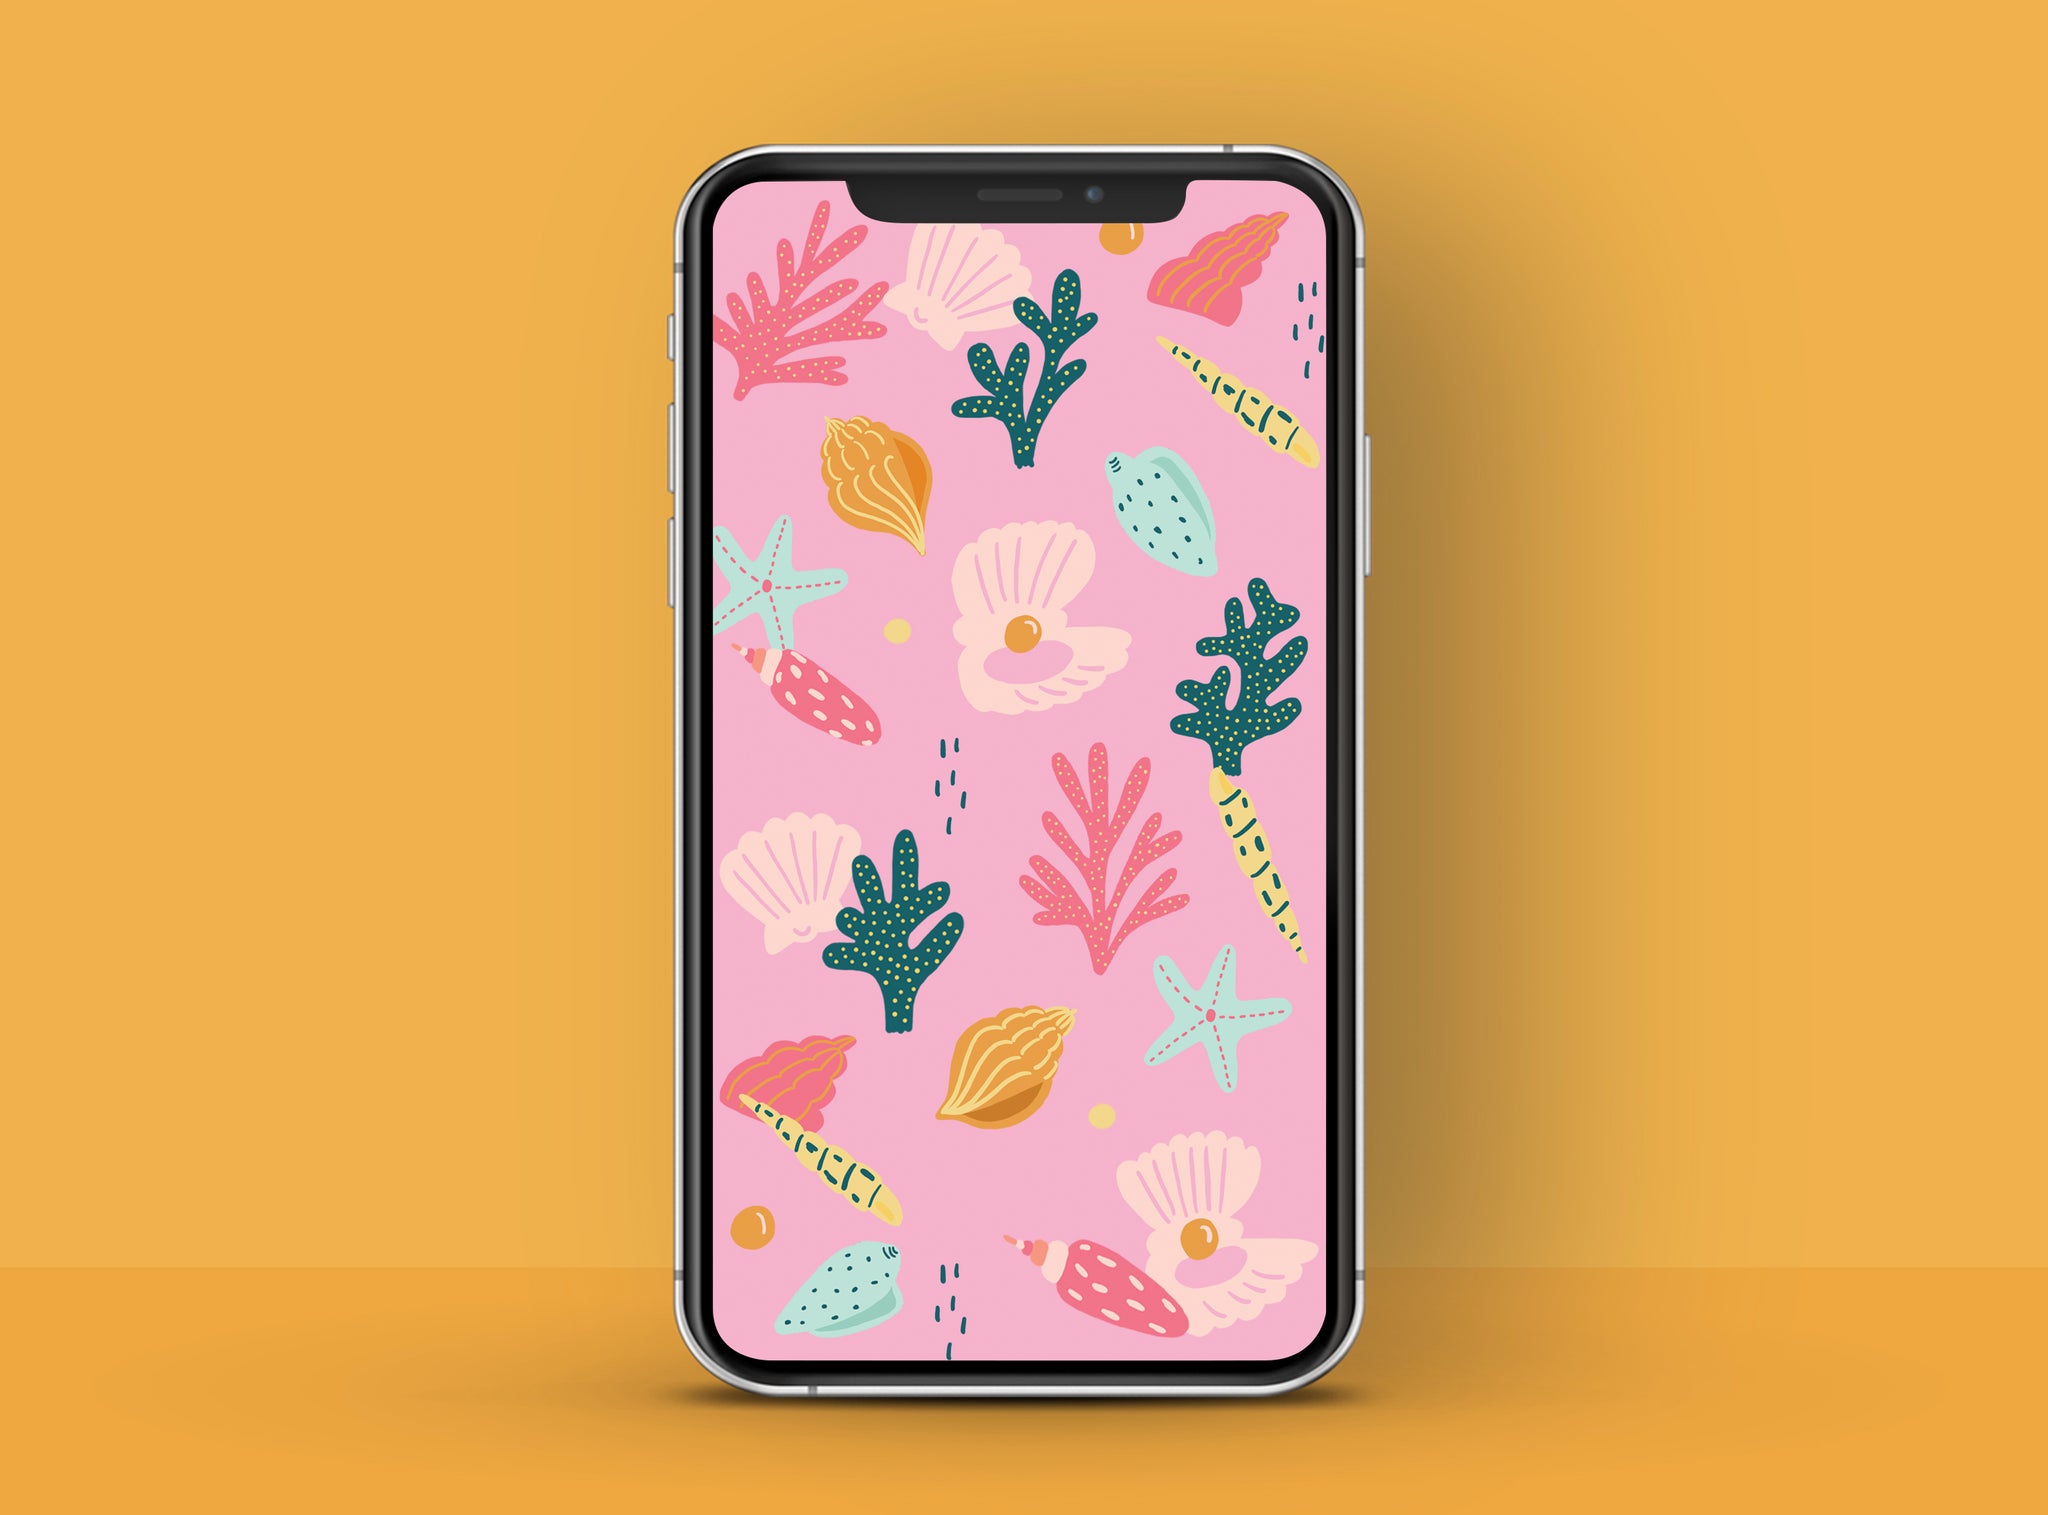 Coral Reef Pattern Free HD Mobile Wallpaper Raspberry Blossom